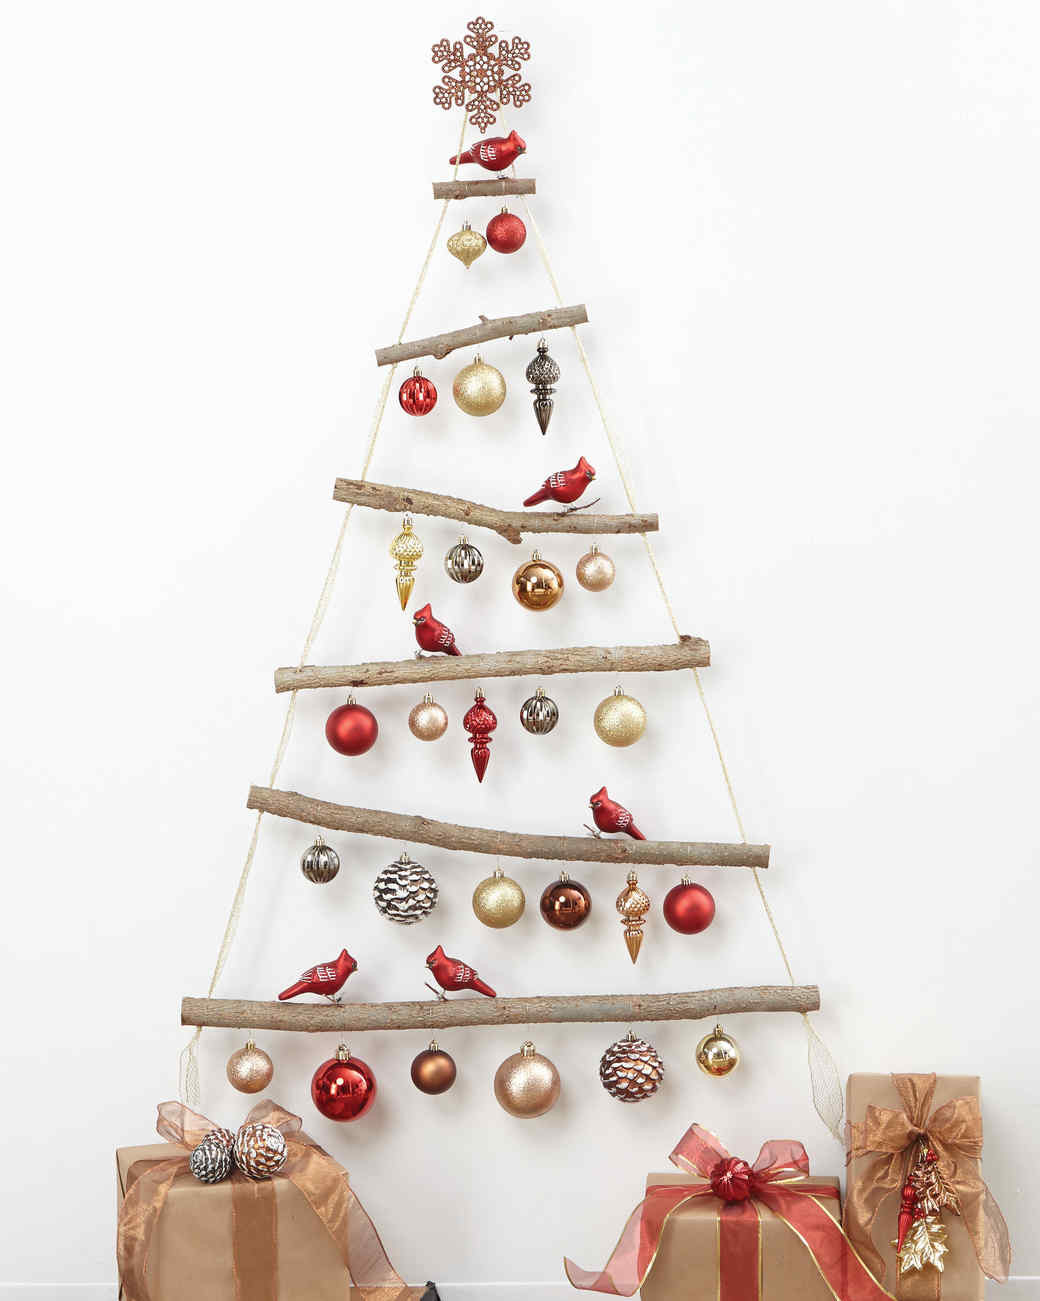 DIY Christmas Pictures
 DIY Christmas Tree How to Make the Ornaments the